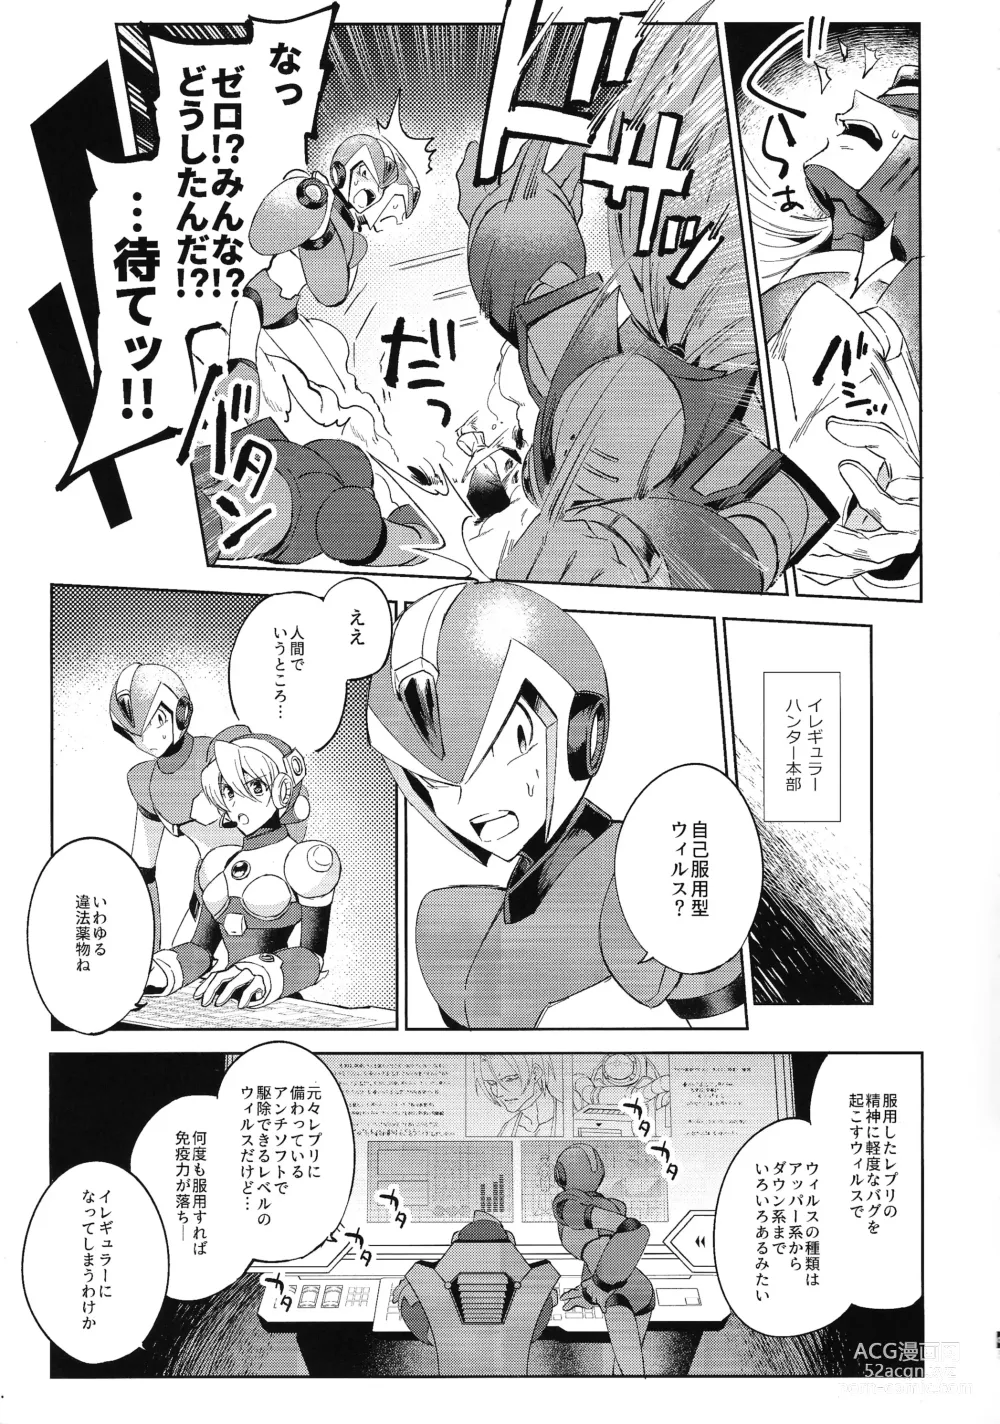 Page 4 of doujinshi HYPER EMERGENCY CALL